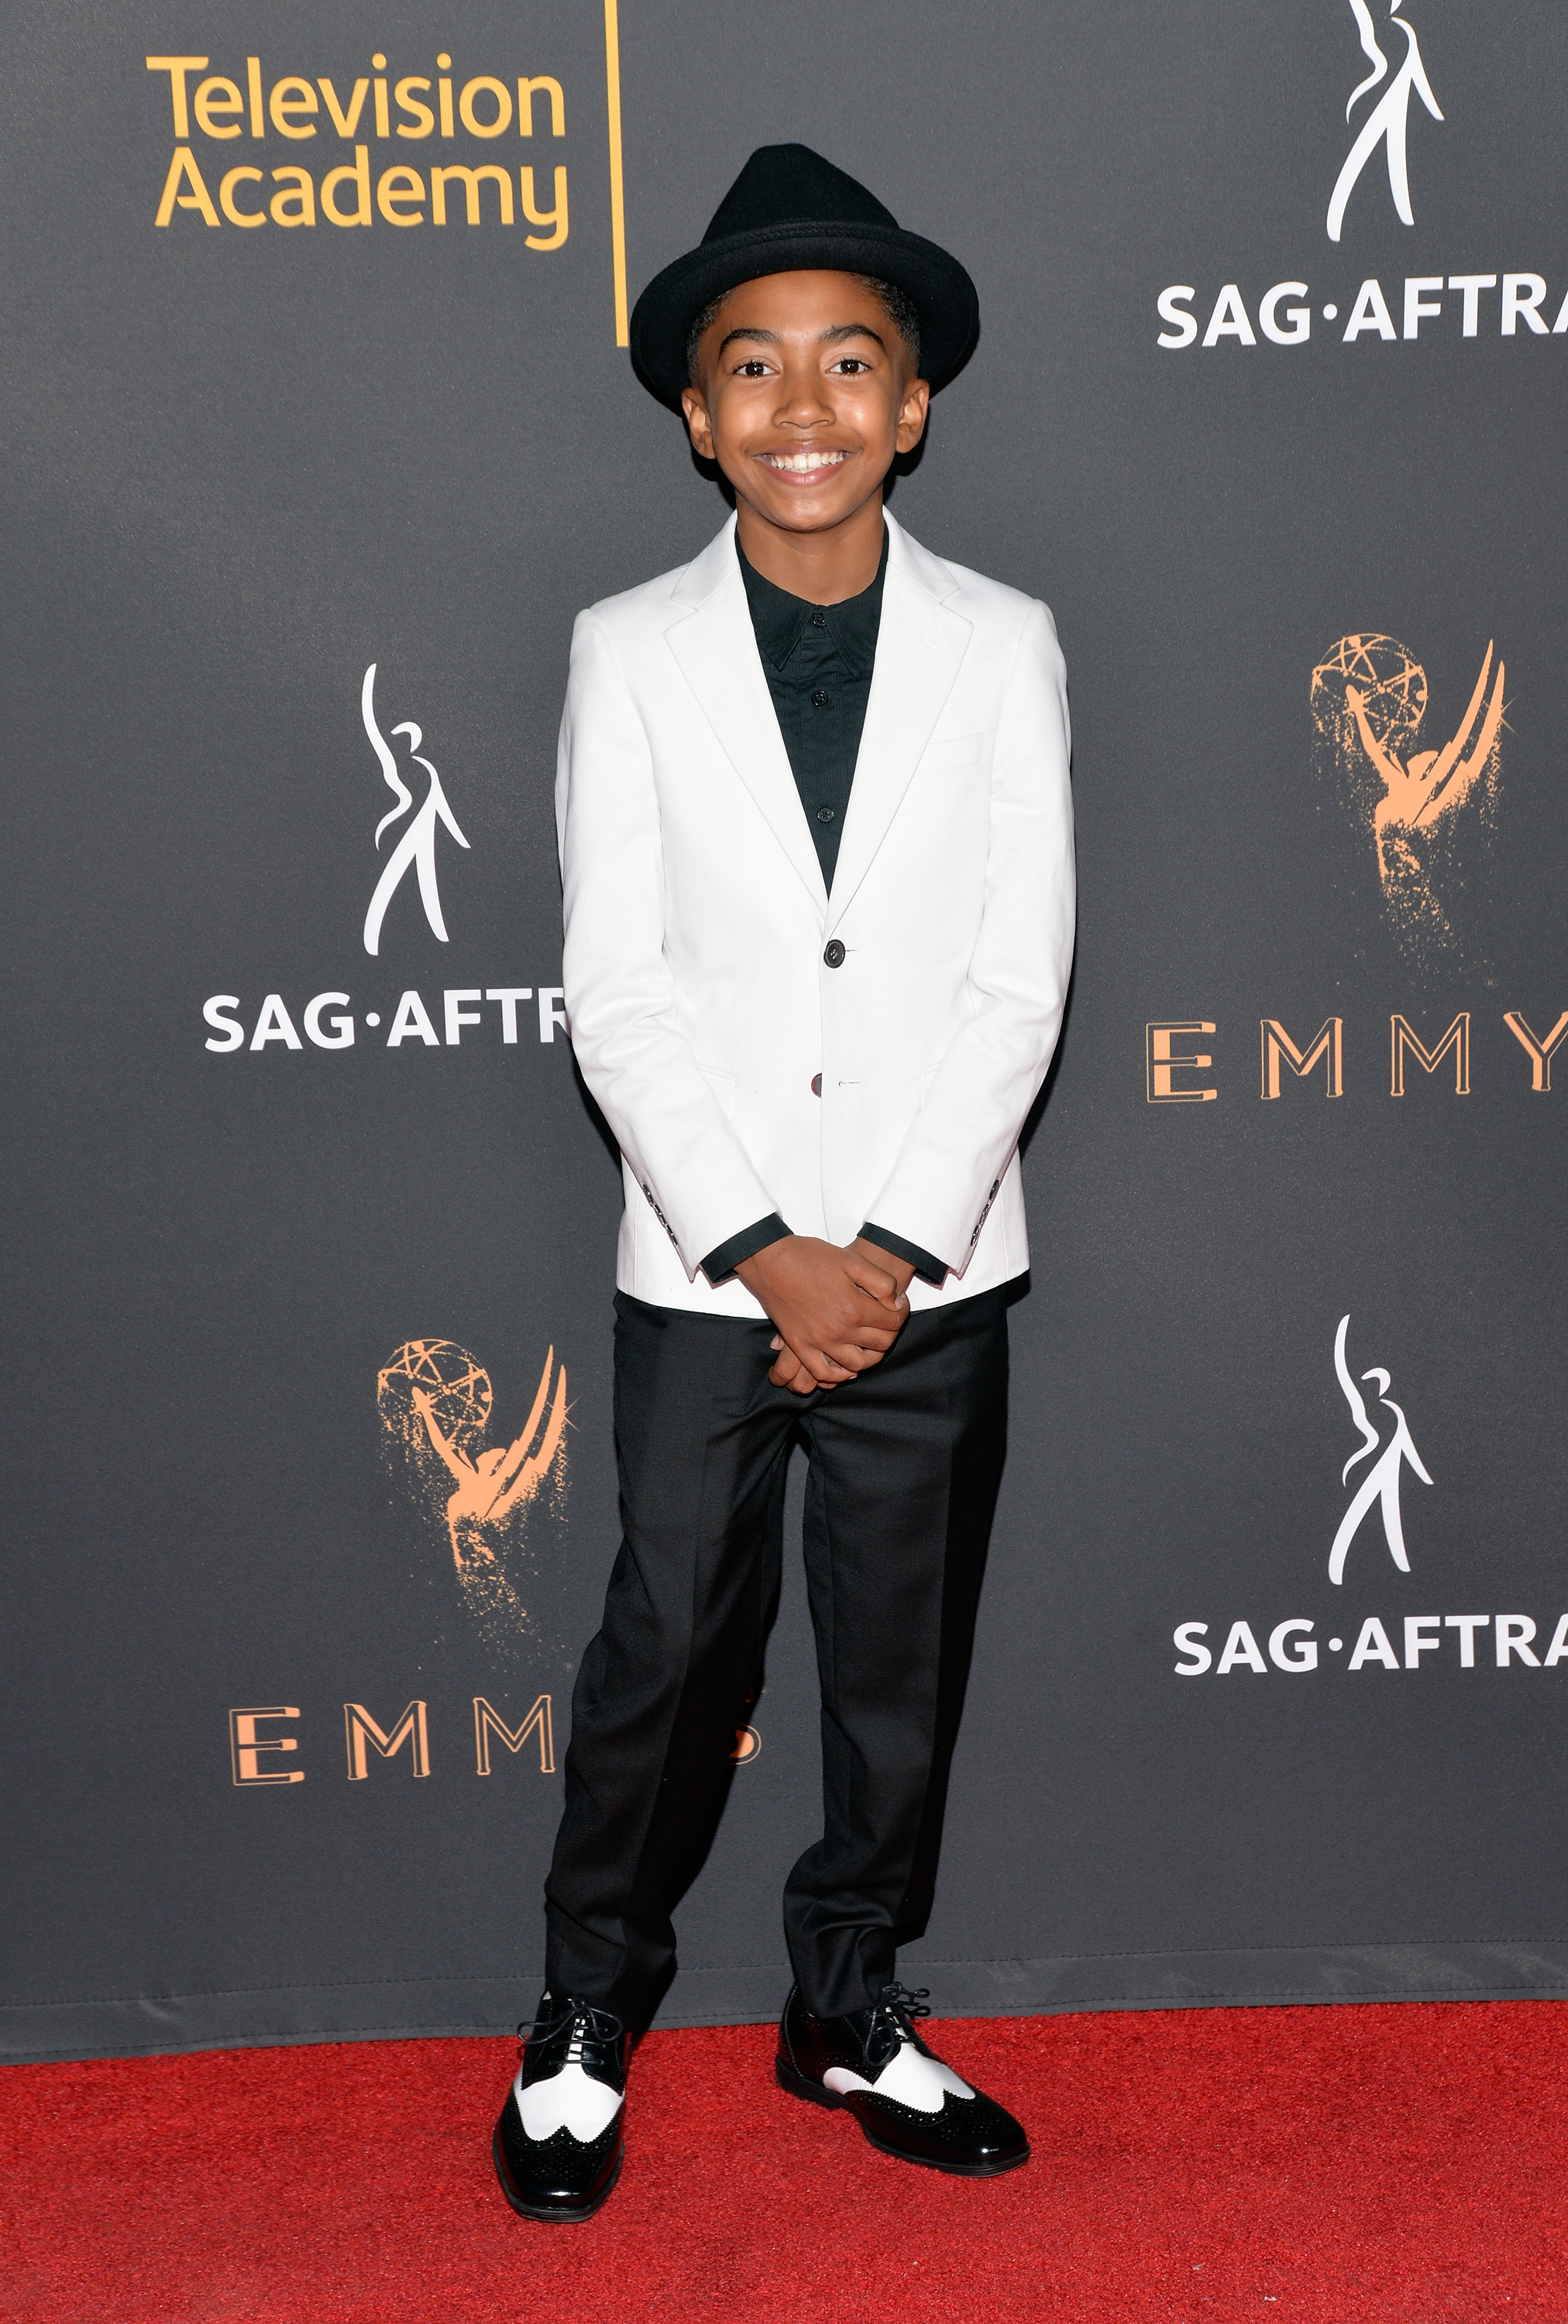 Television Academy And SAG-AFTRA's 5th Annual Dynamic And Diverse Celebration - Arrivals